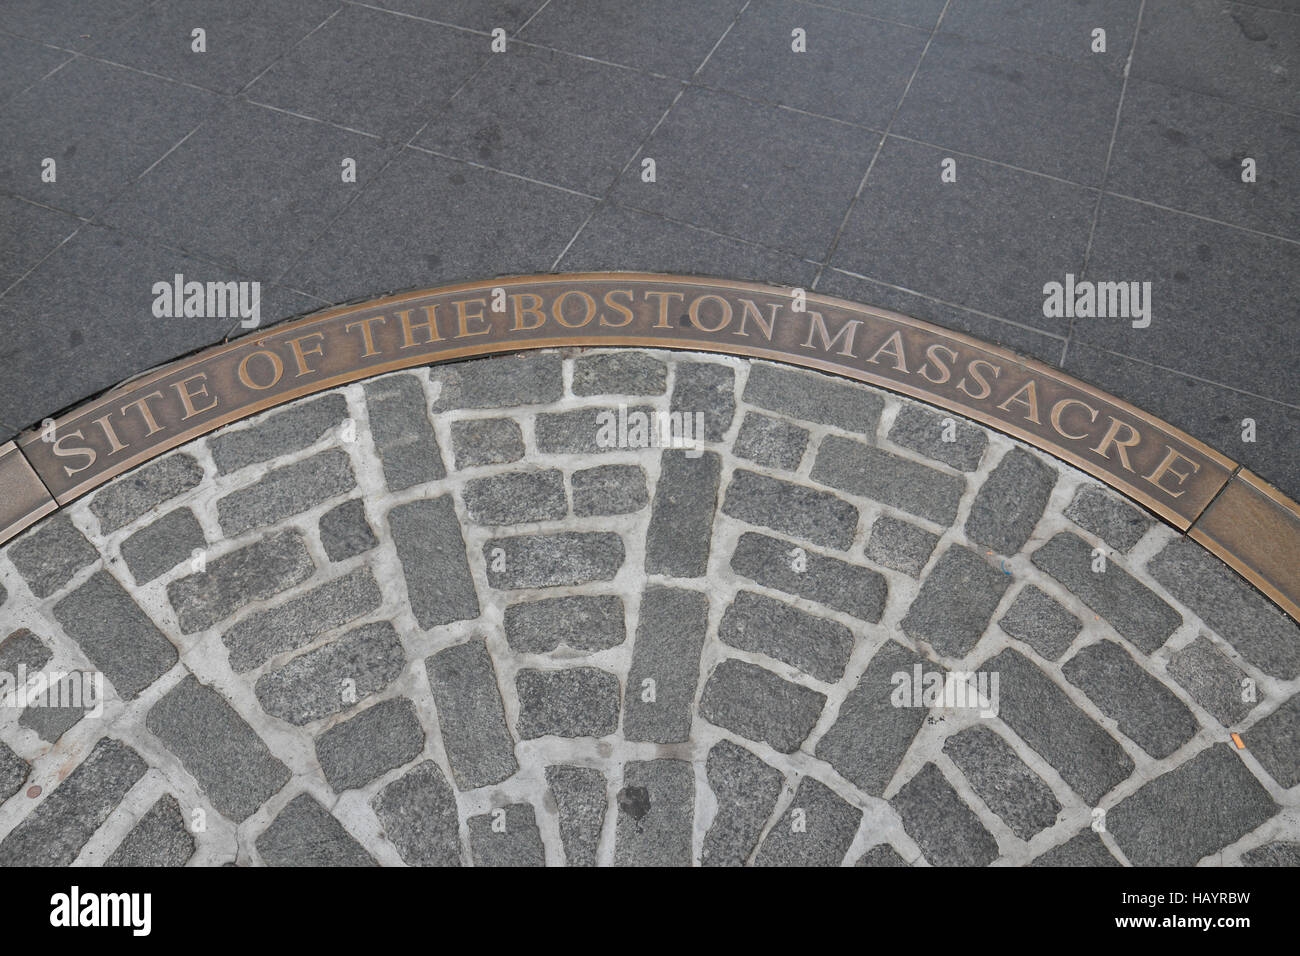 The stone cobbles marking the 'Site of the Boston Massacre' on 5th March 1770, outside the Old State House, Boston. MA. Stock Photo